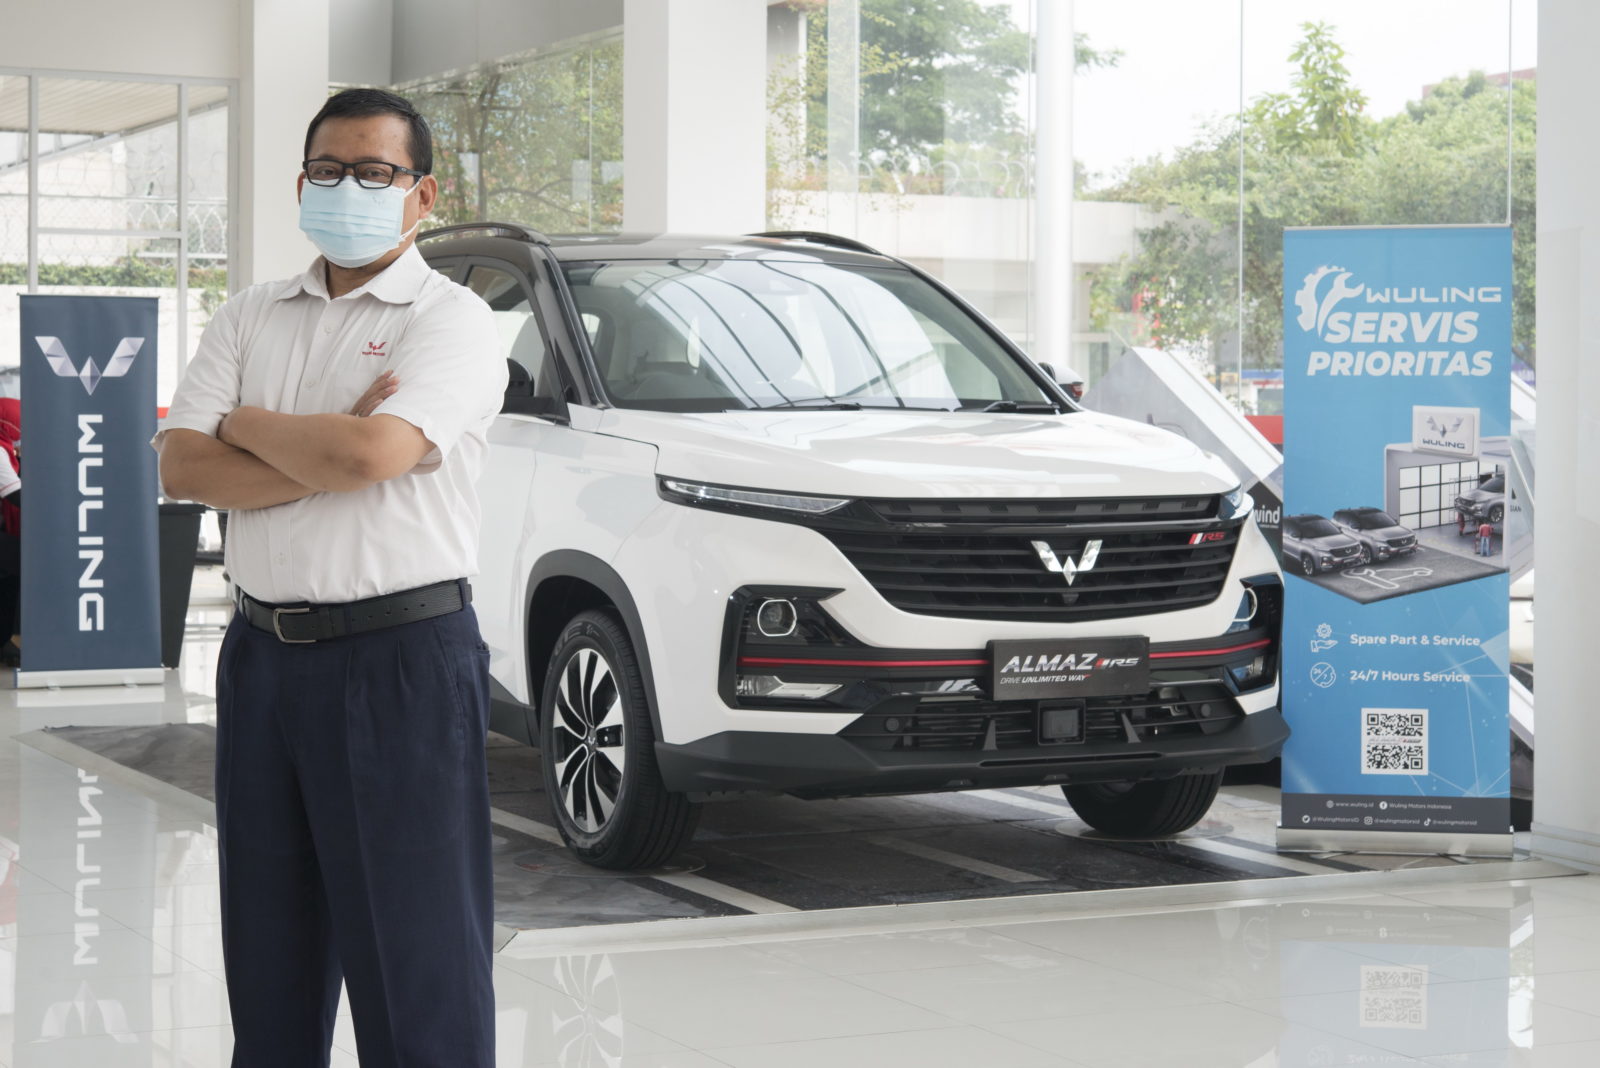 Image Wuling Service Priority Program Presented for Almaz RS Customers